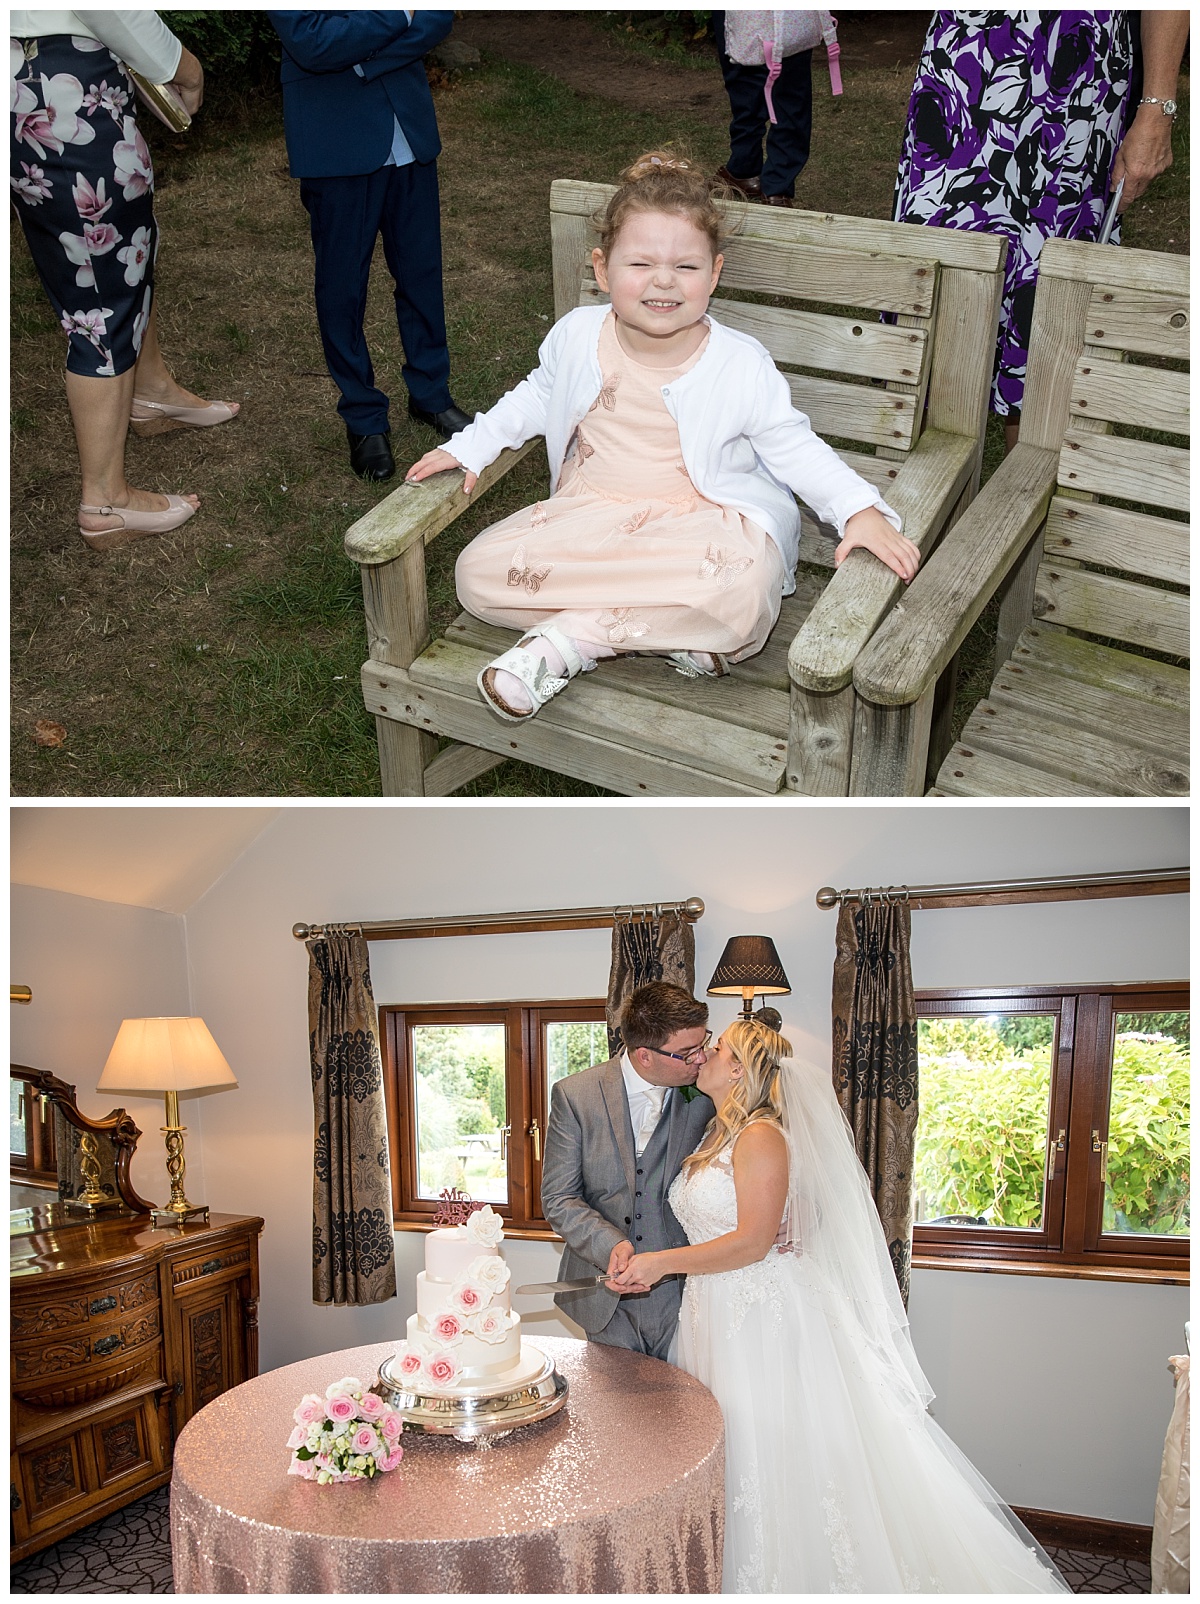 Wedding Photography Manchester - Lisa and James's The Three Horseshoes Country Inn wedding 41